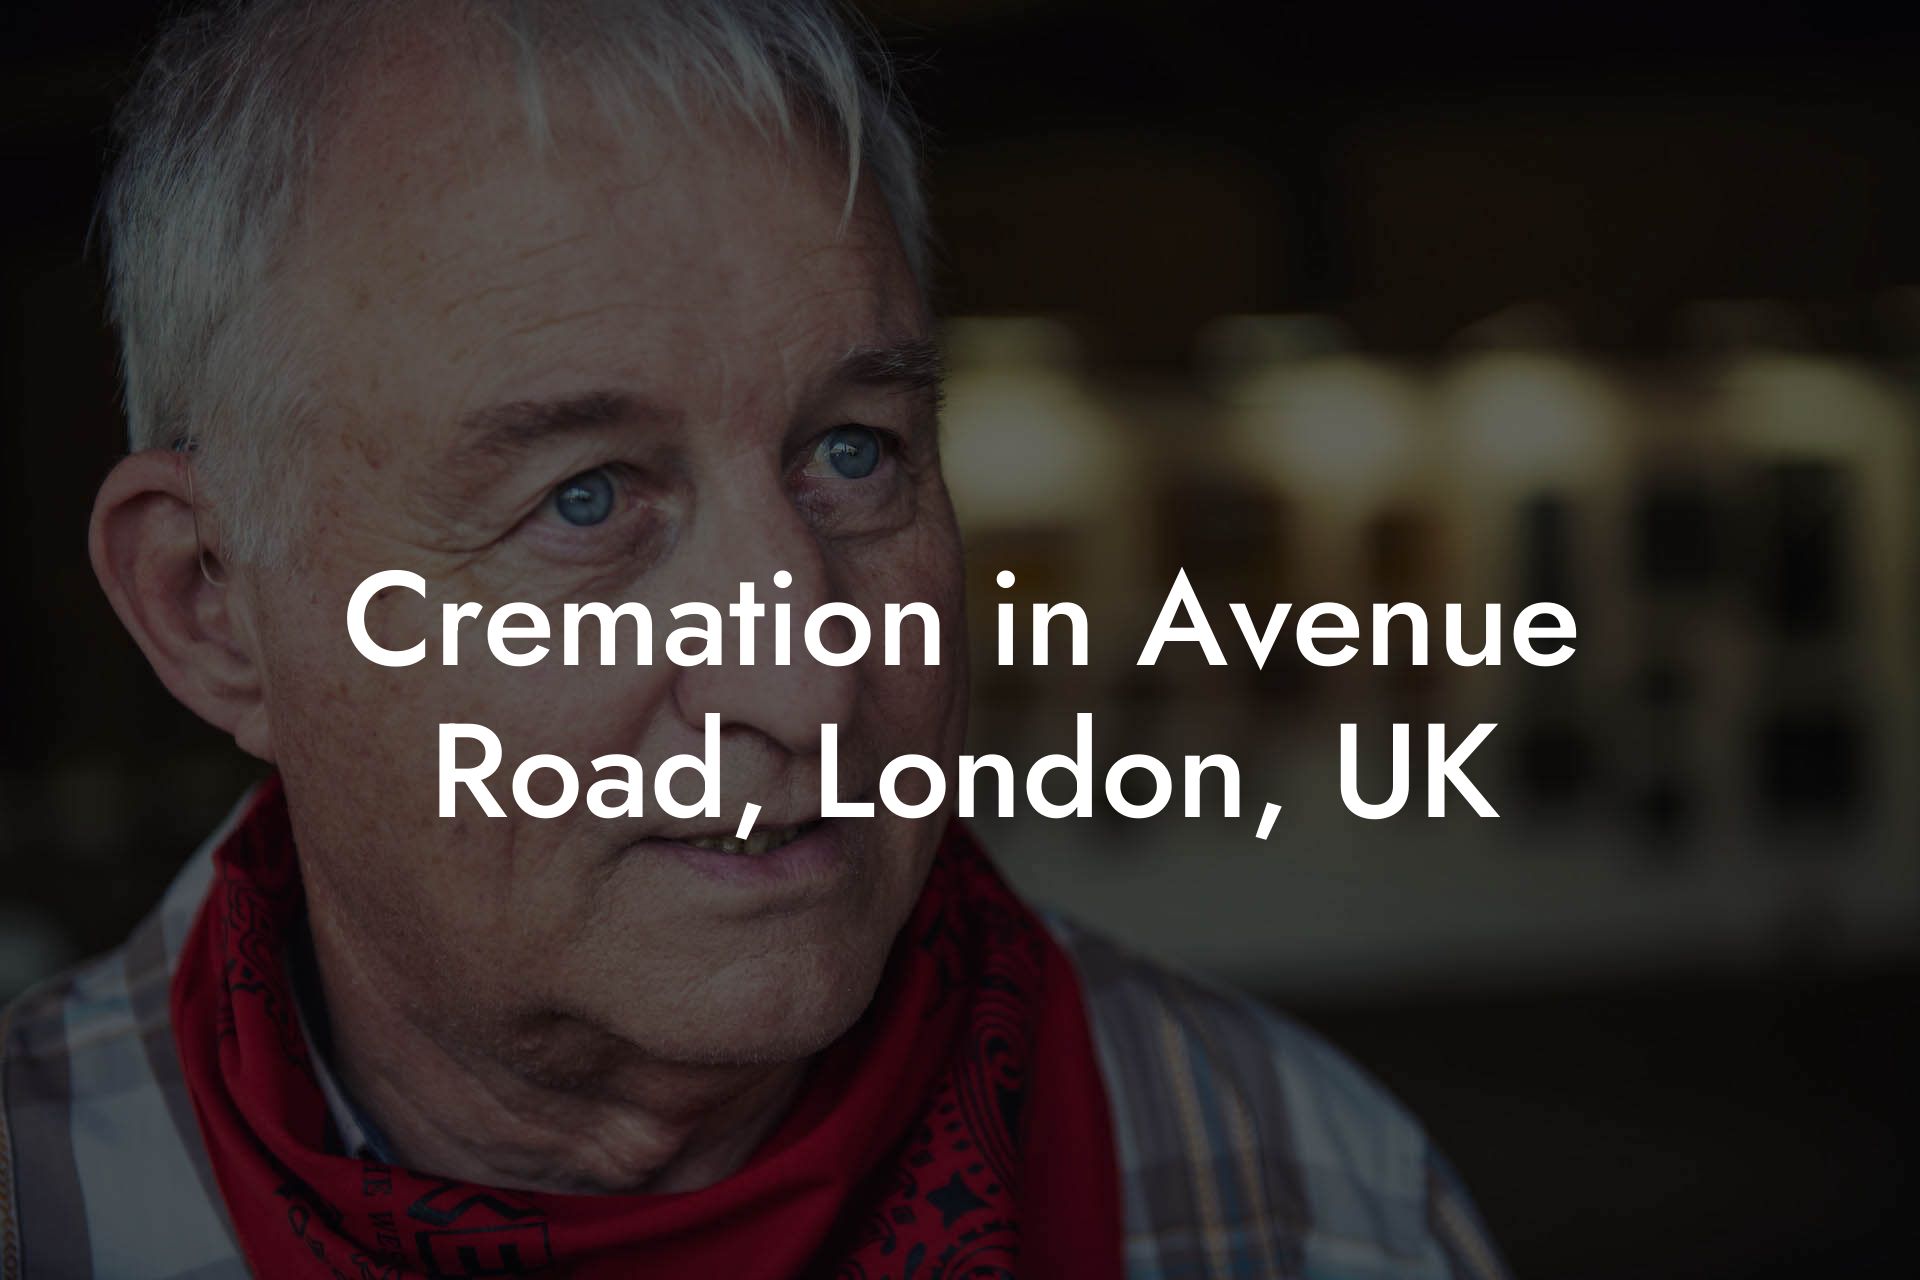 Cremation in Avenue Road, London, UK